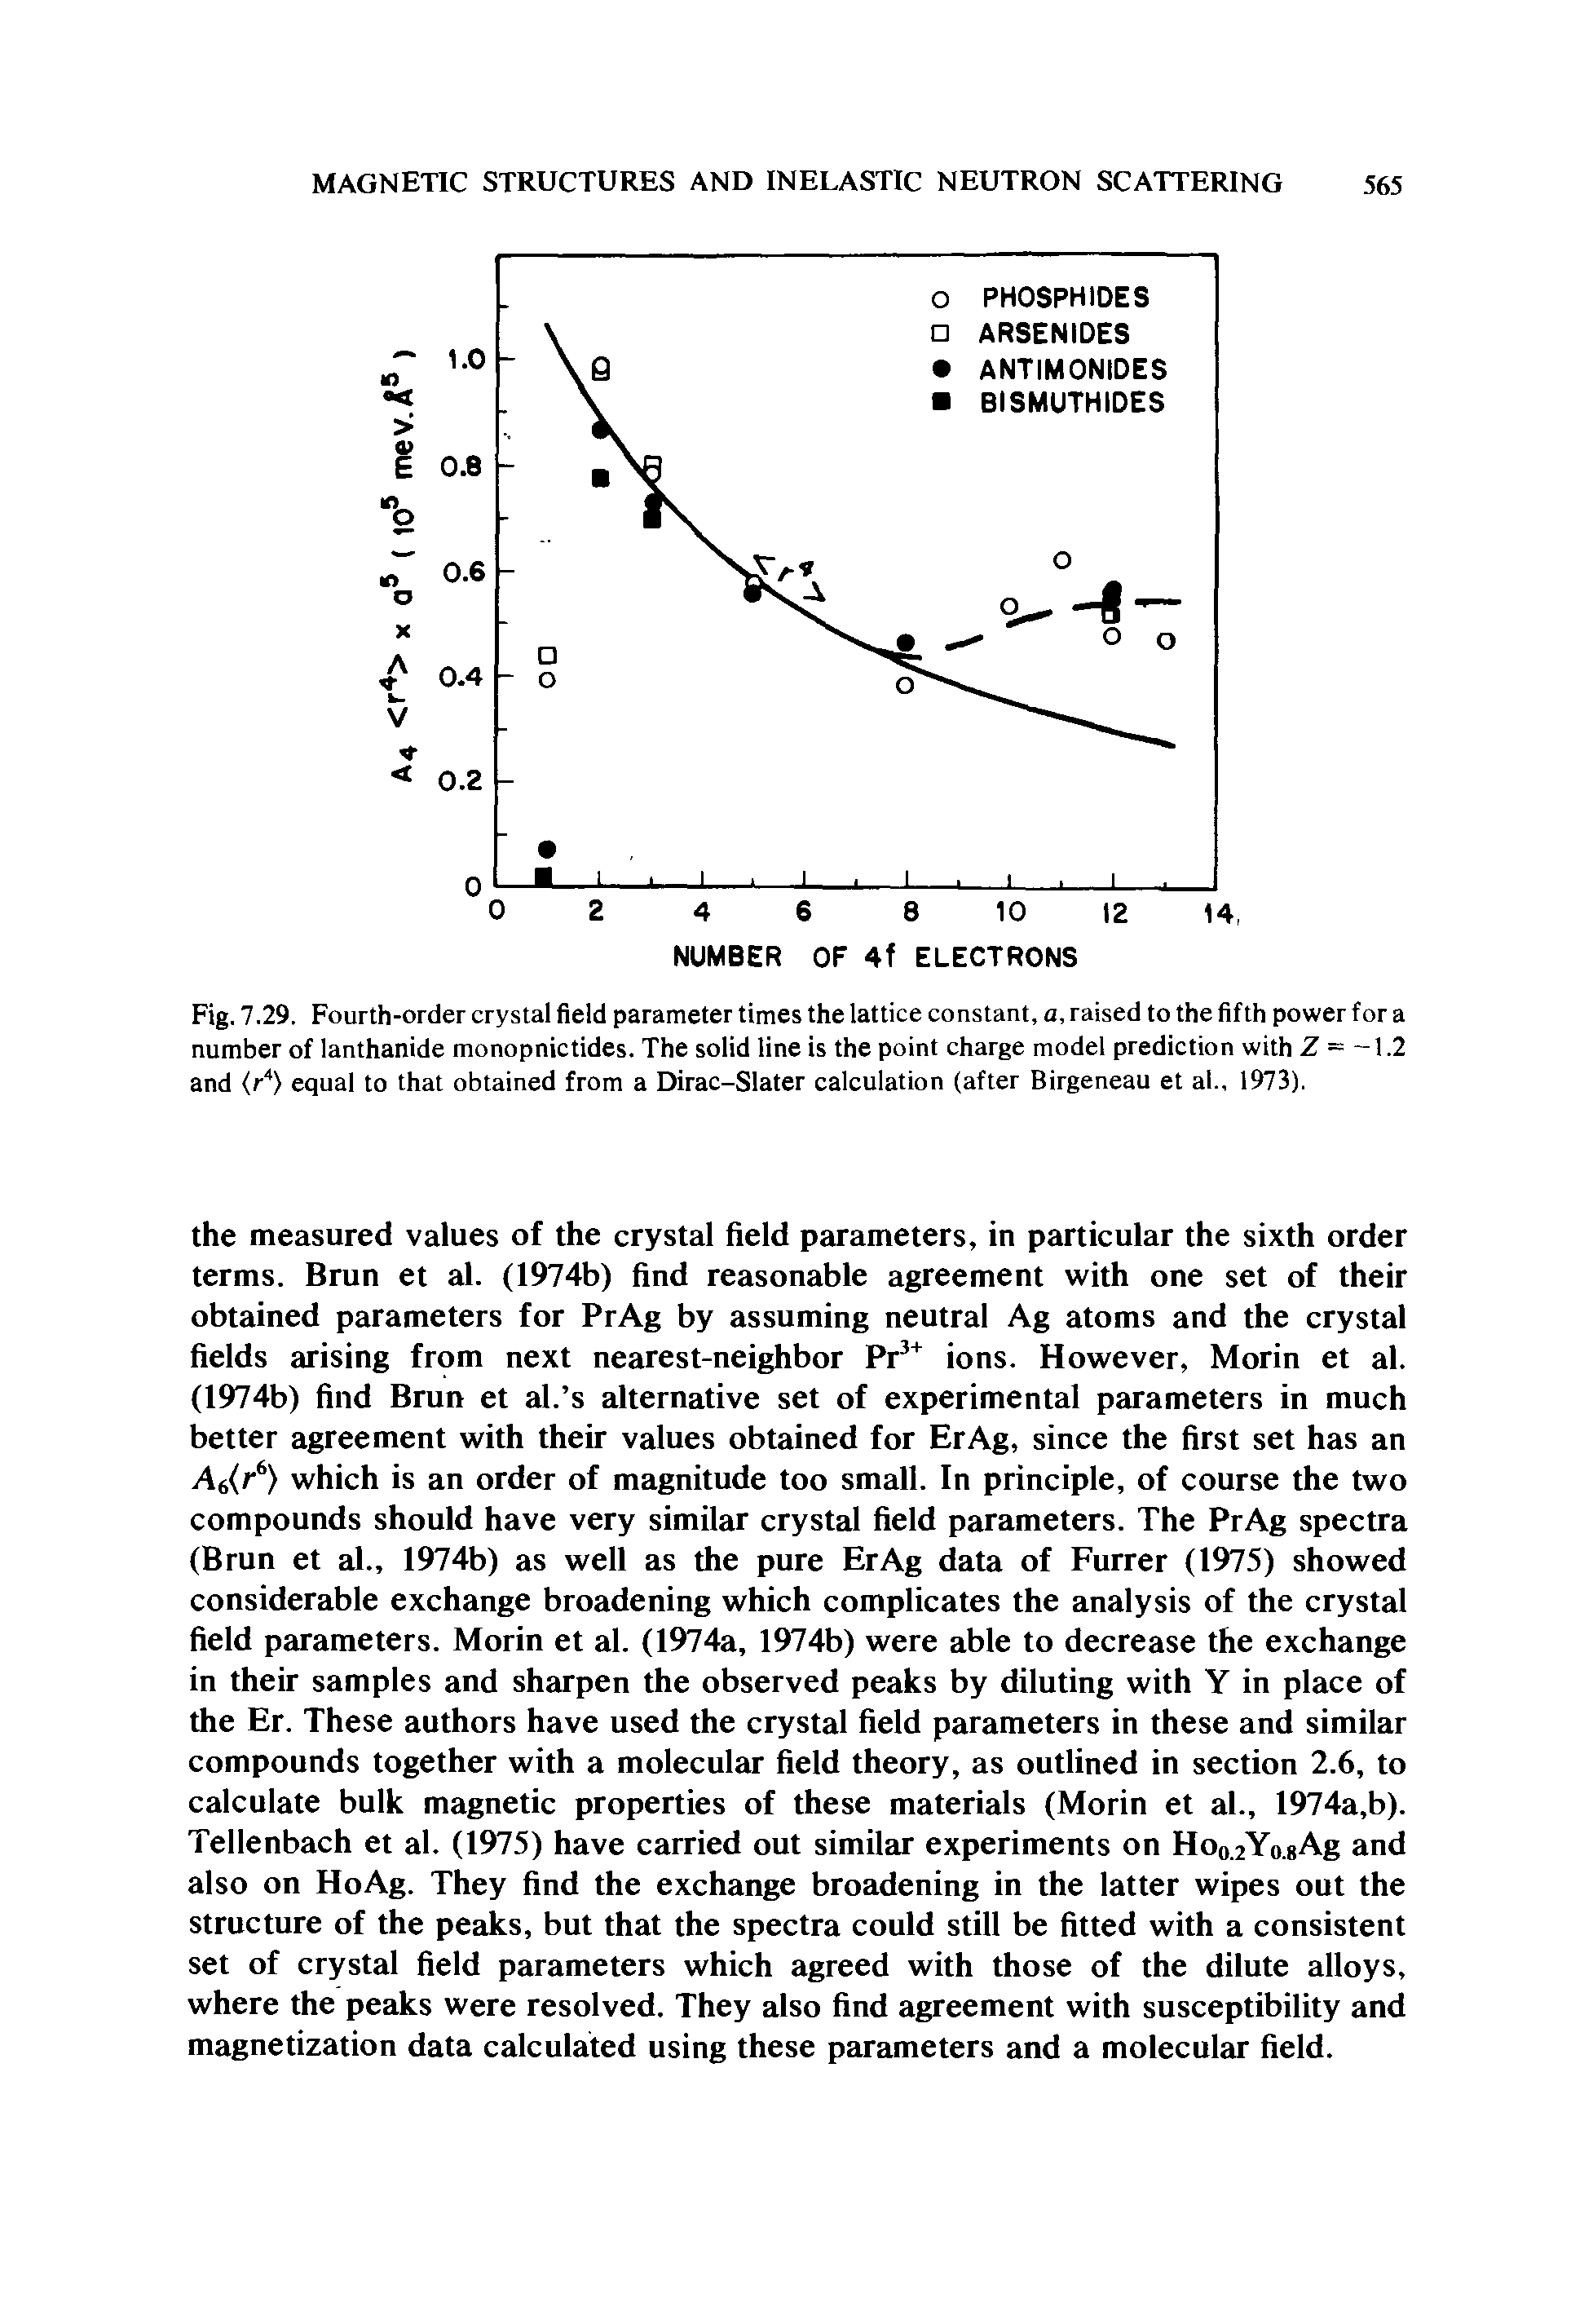 Fig. 7.29. Fourth-order crystal field parameter times the lattice constant, a, raised to the fifth power for a number of lanthanide monopnictides. The solid line is the point charge model prediction with Z = -1.2 and (r" ) equal to that obtained from a Dirac-Slater calculation (after Birgeneau et al., 1973).